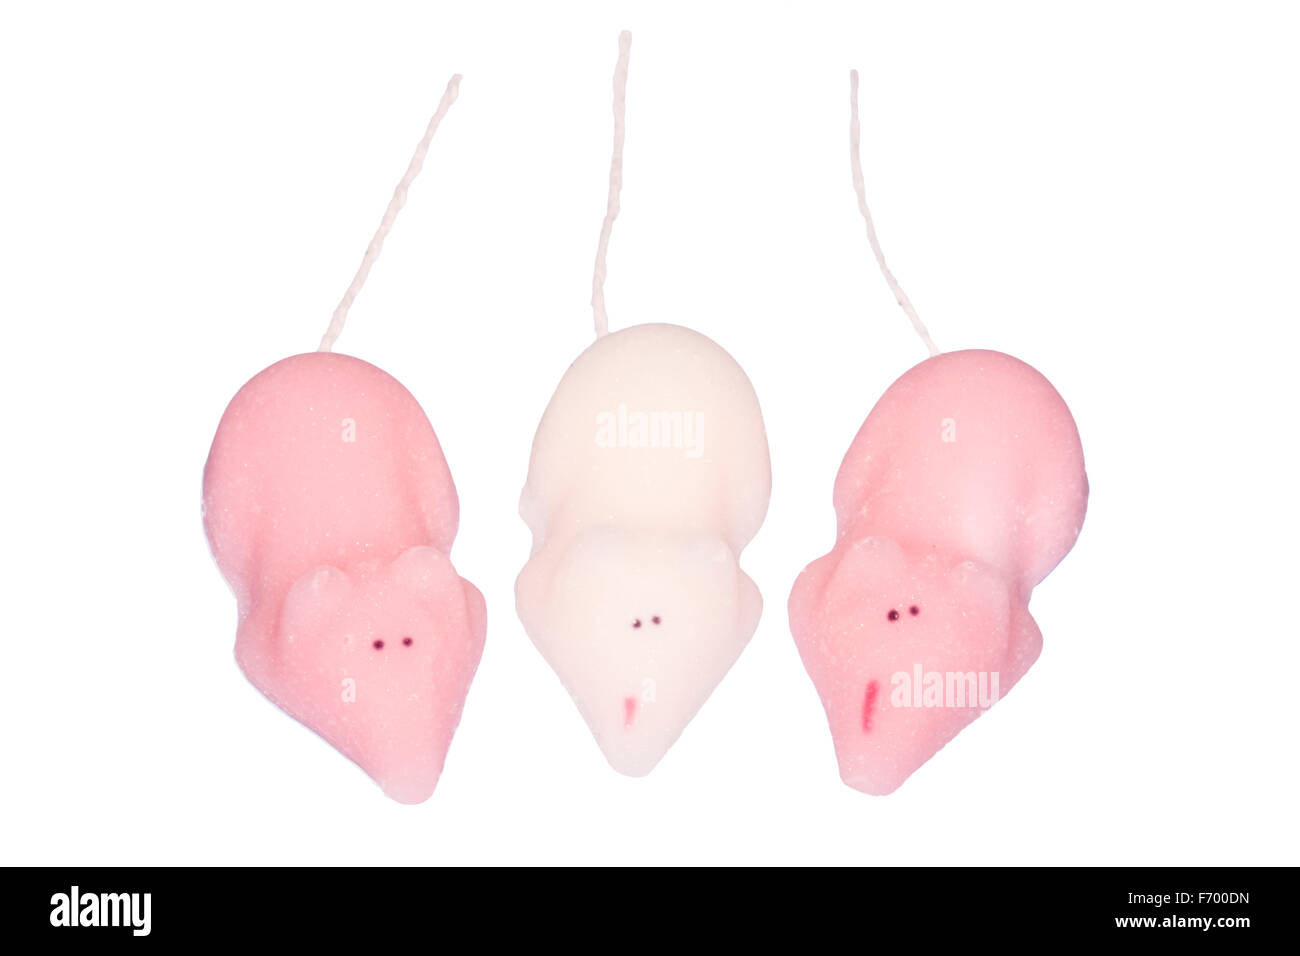 Sugar mice cut out or isolated against a white background. Stock Photo